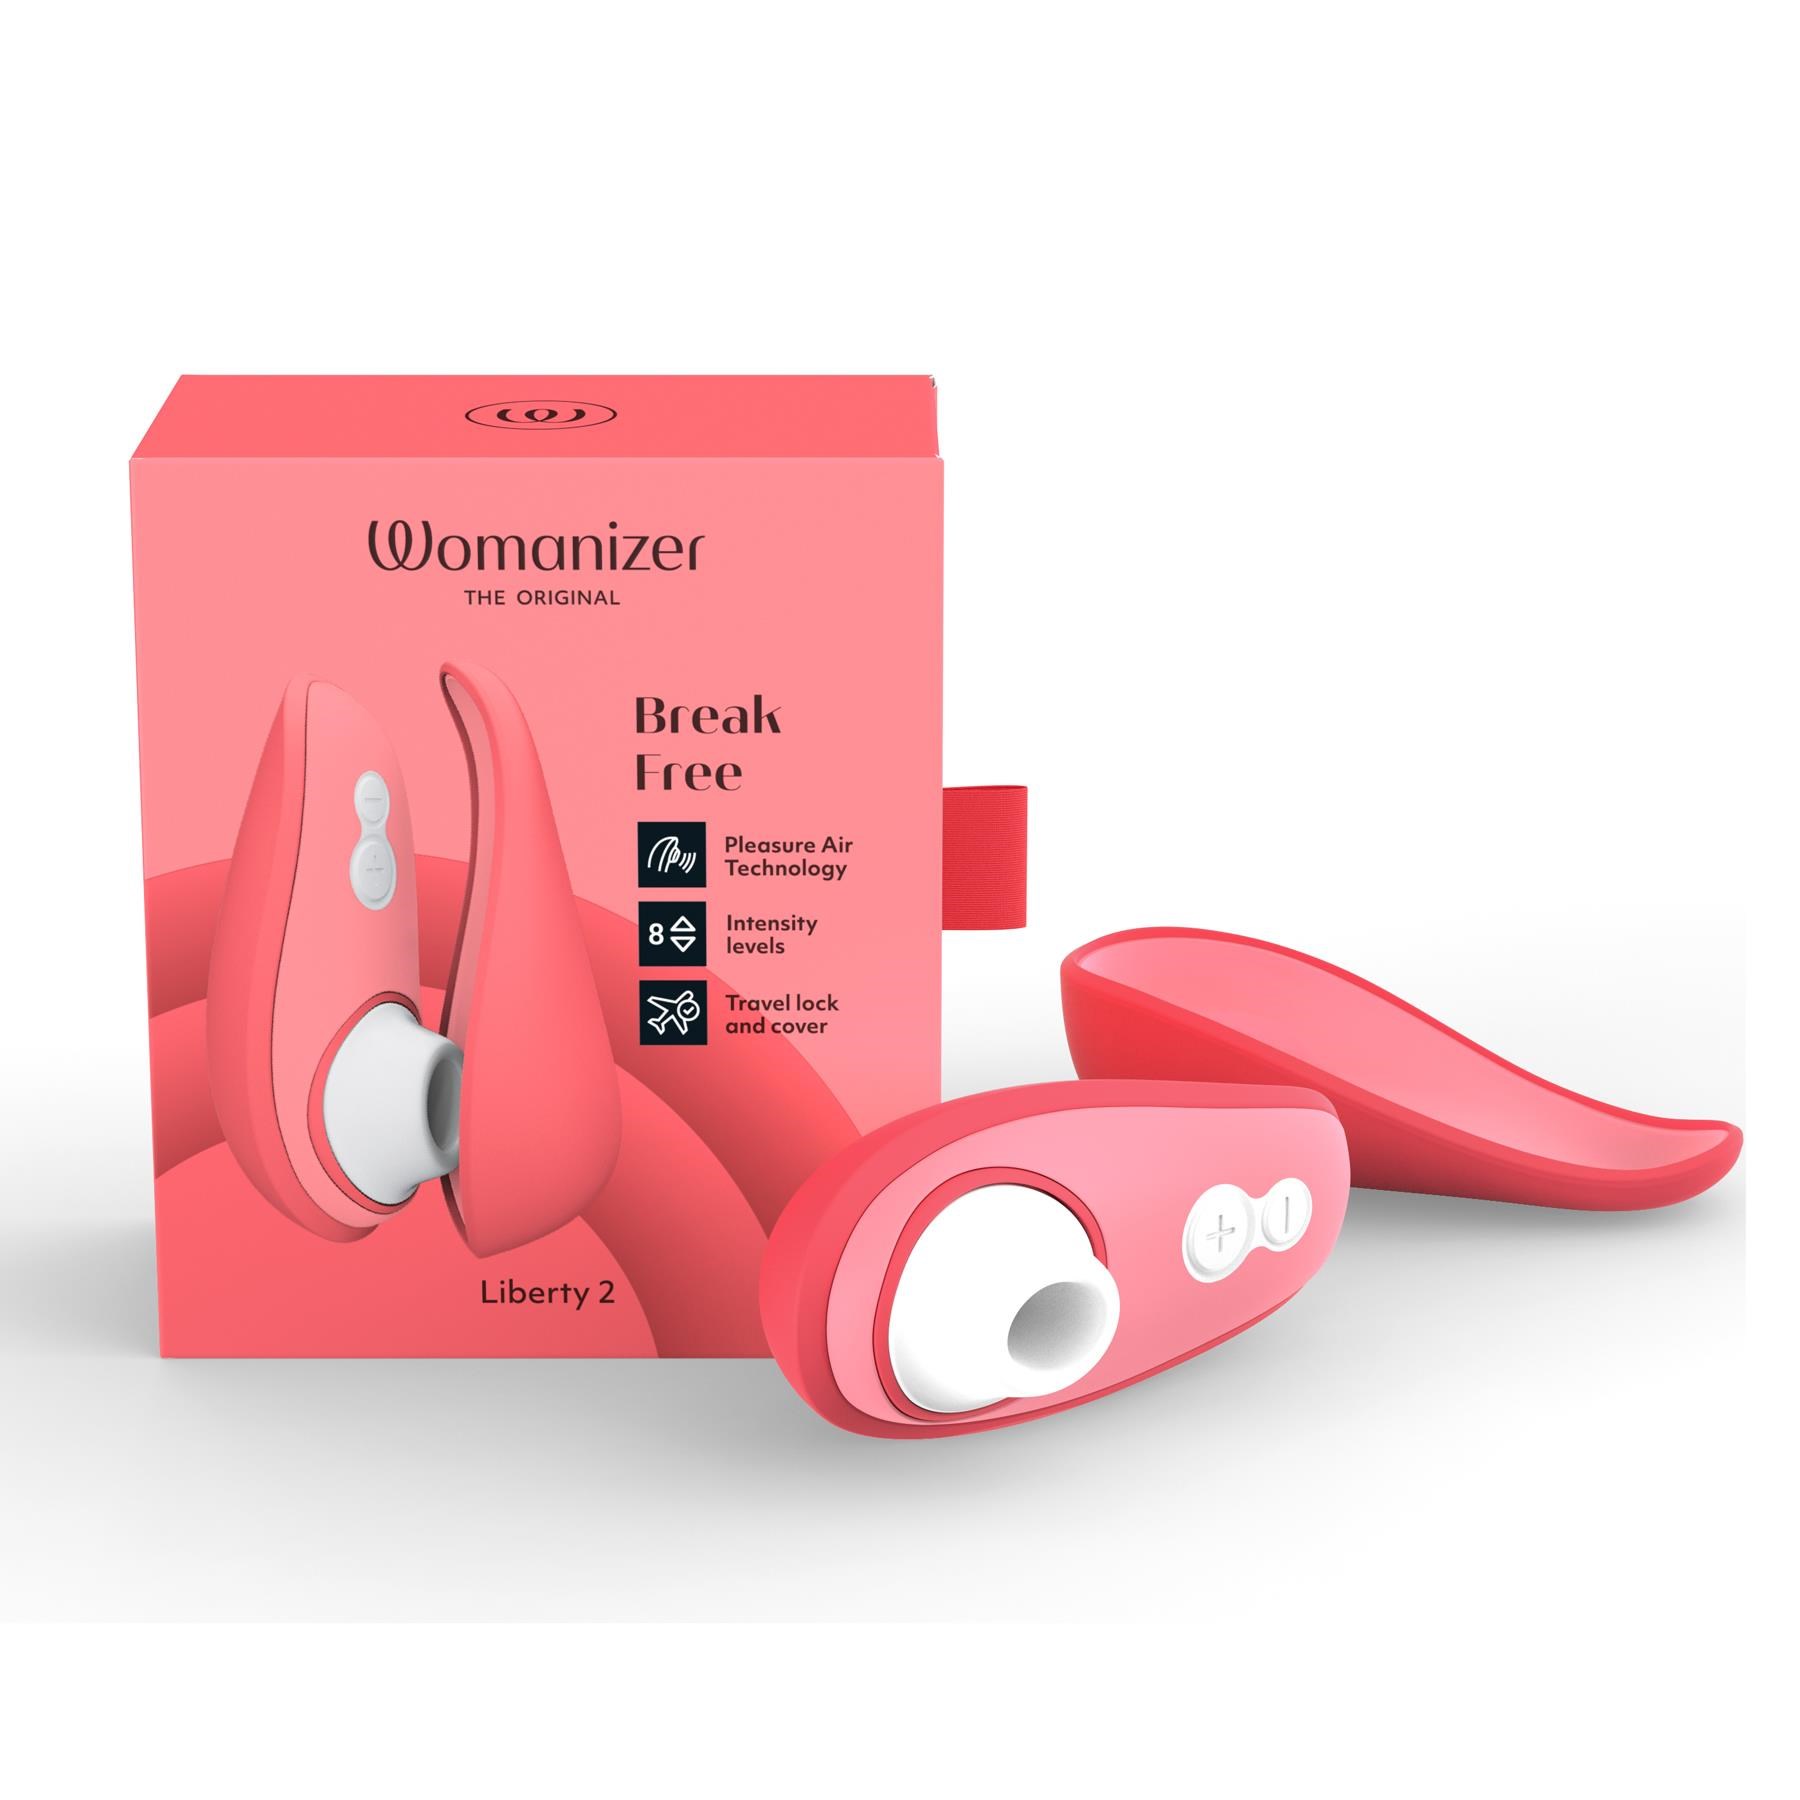 Womanizer Liberty 2 Pleasure Air Clitoral Stimulator- Product and Packaging